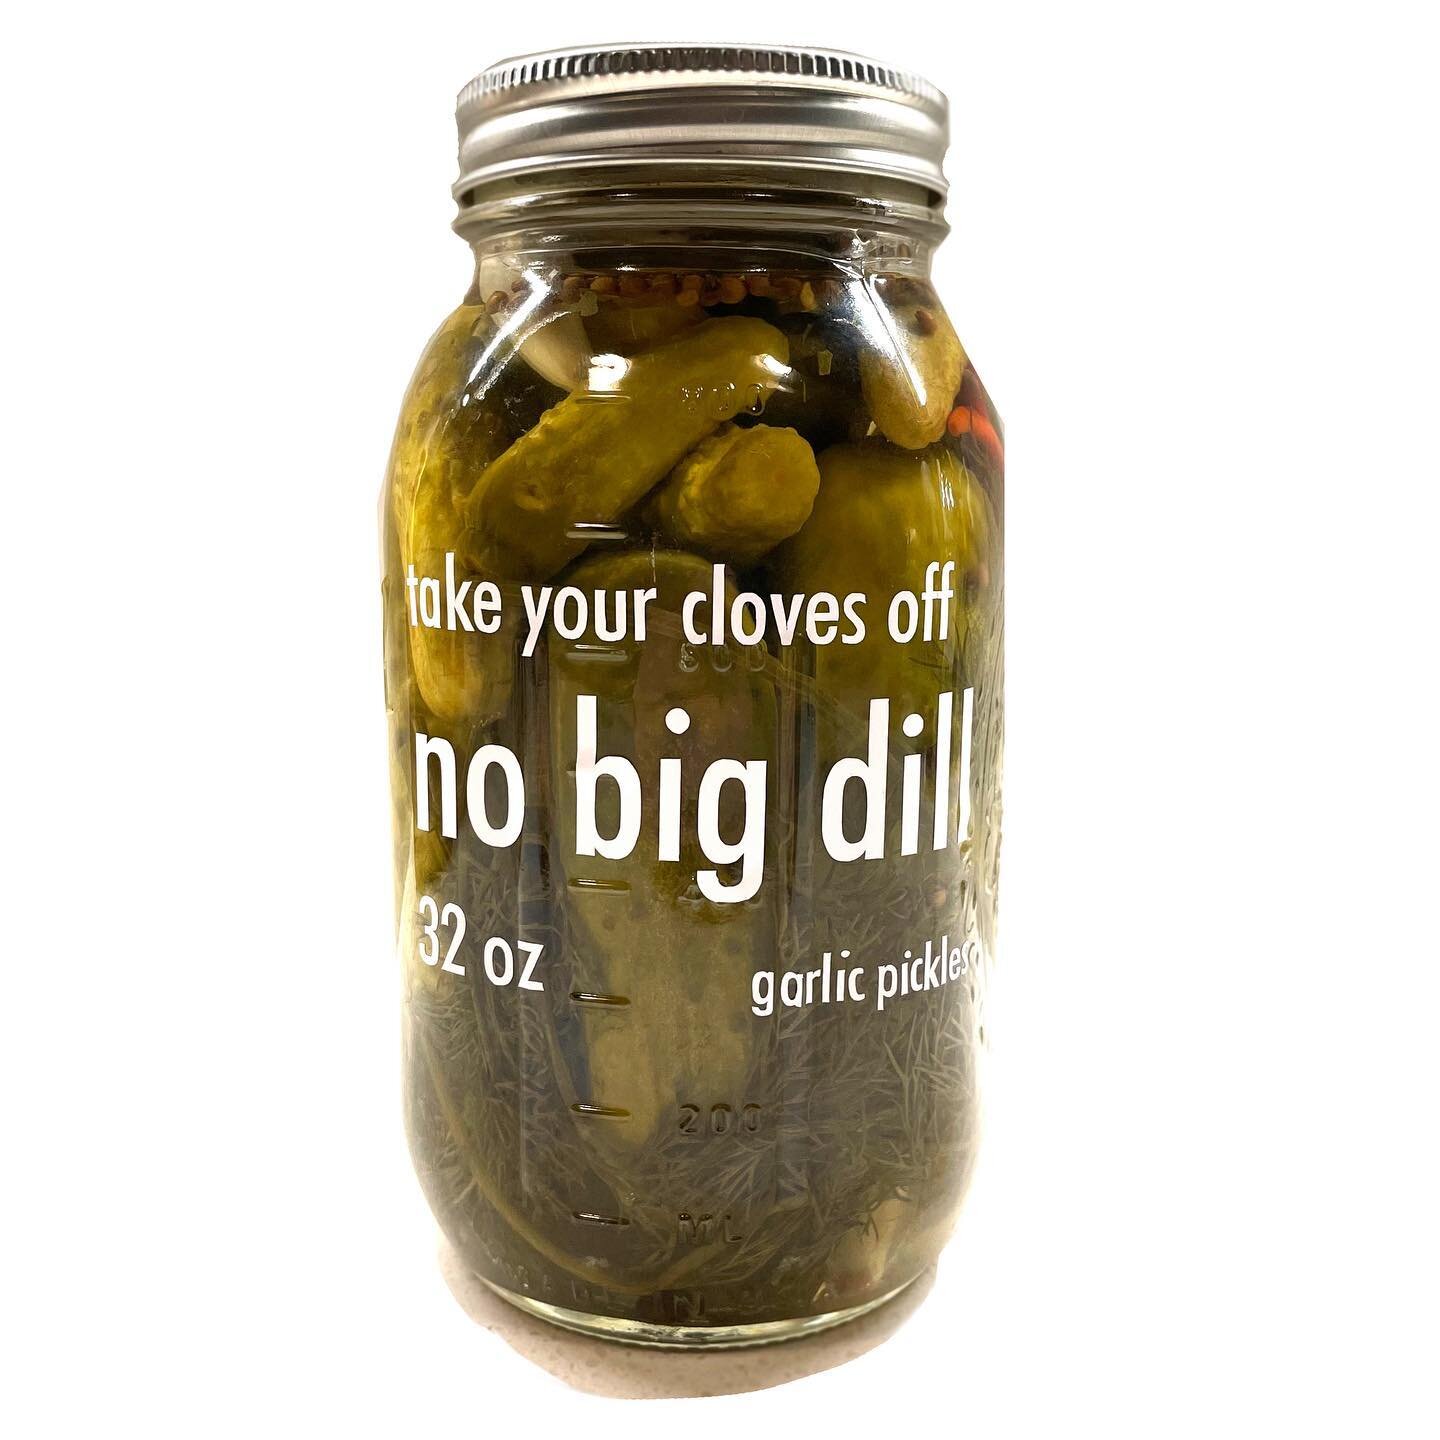 our garlic dill will surely turn some heads 

#pickles #dillpickles #gherkins #fermentedfoods #homemadepickles #picklesarelife #gherkinsarelife #nobigdill #babycukes #babycukesarethebest